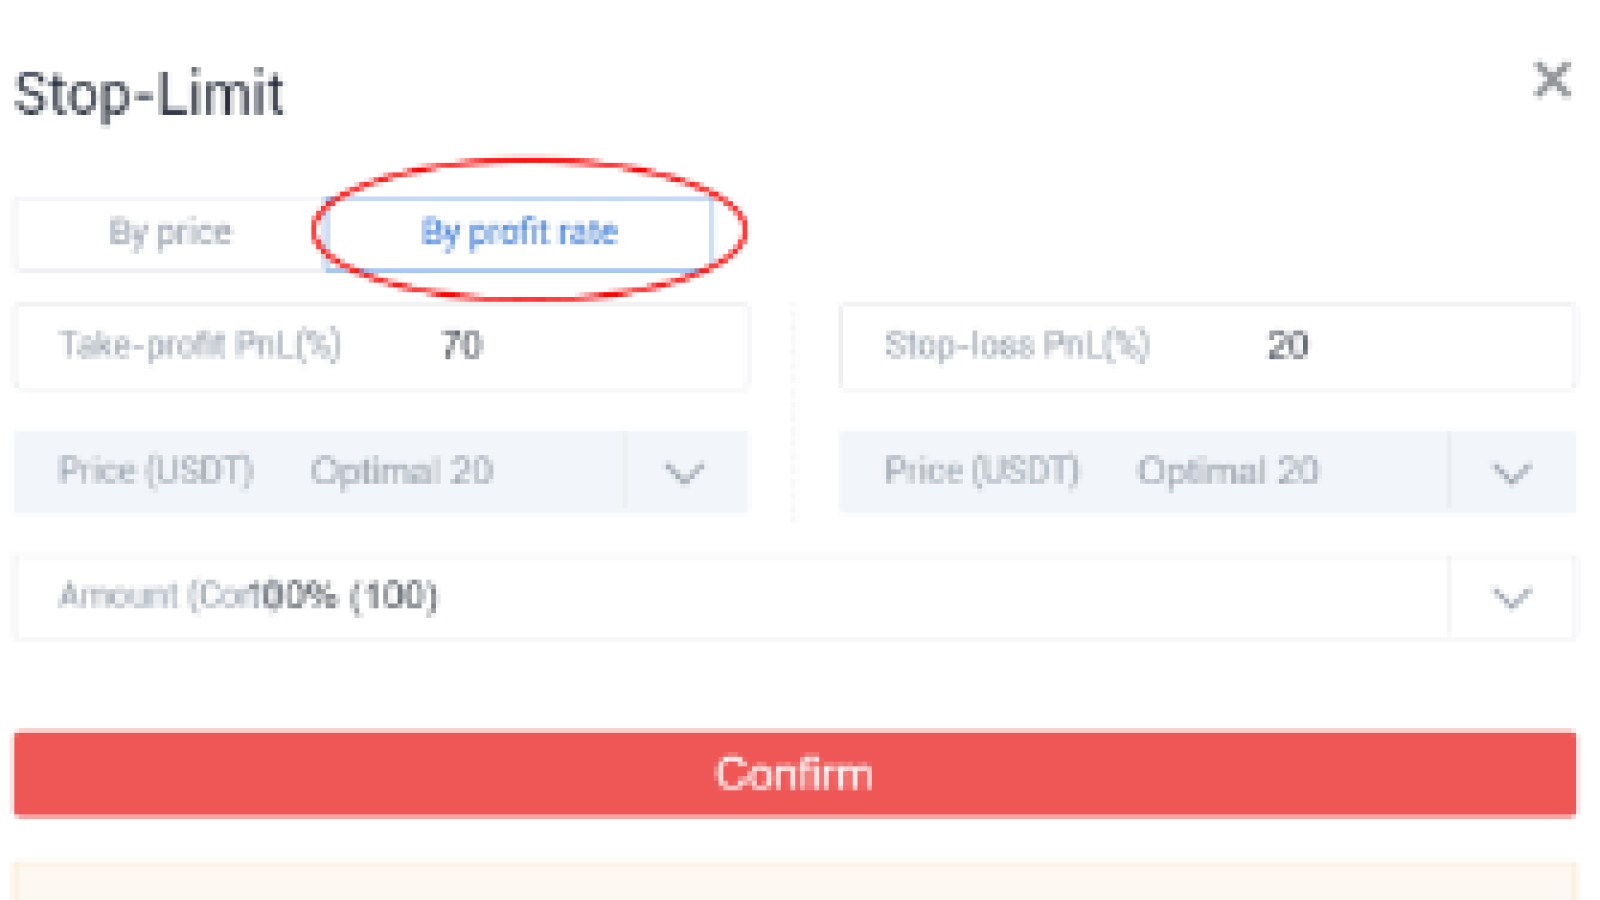 Setting orders by profit rates